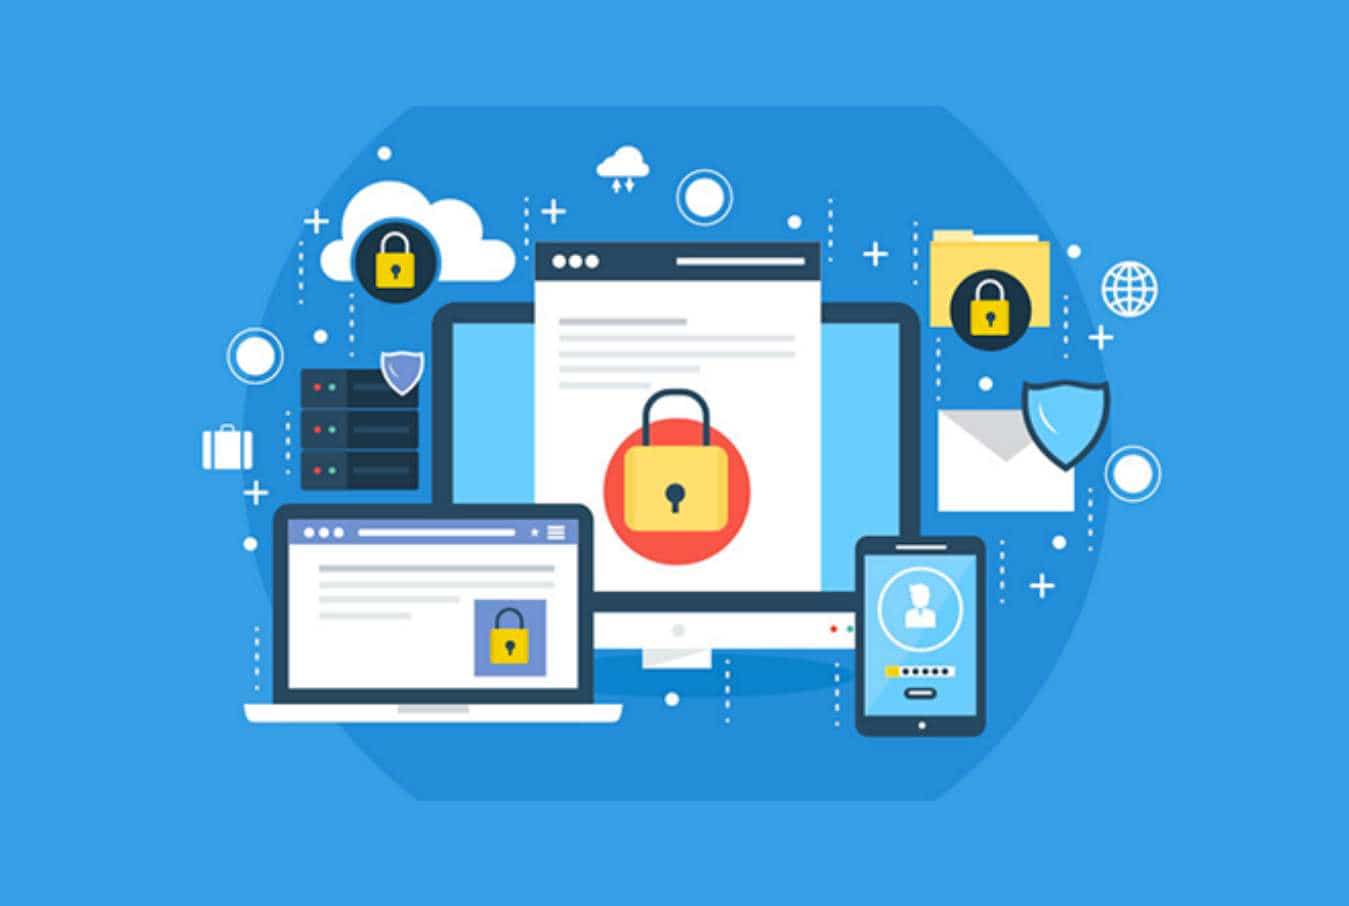 What are endpoint security threats, and how can they enter your device?